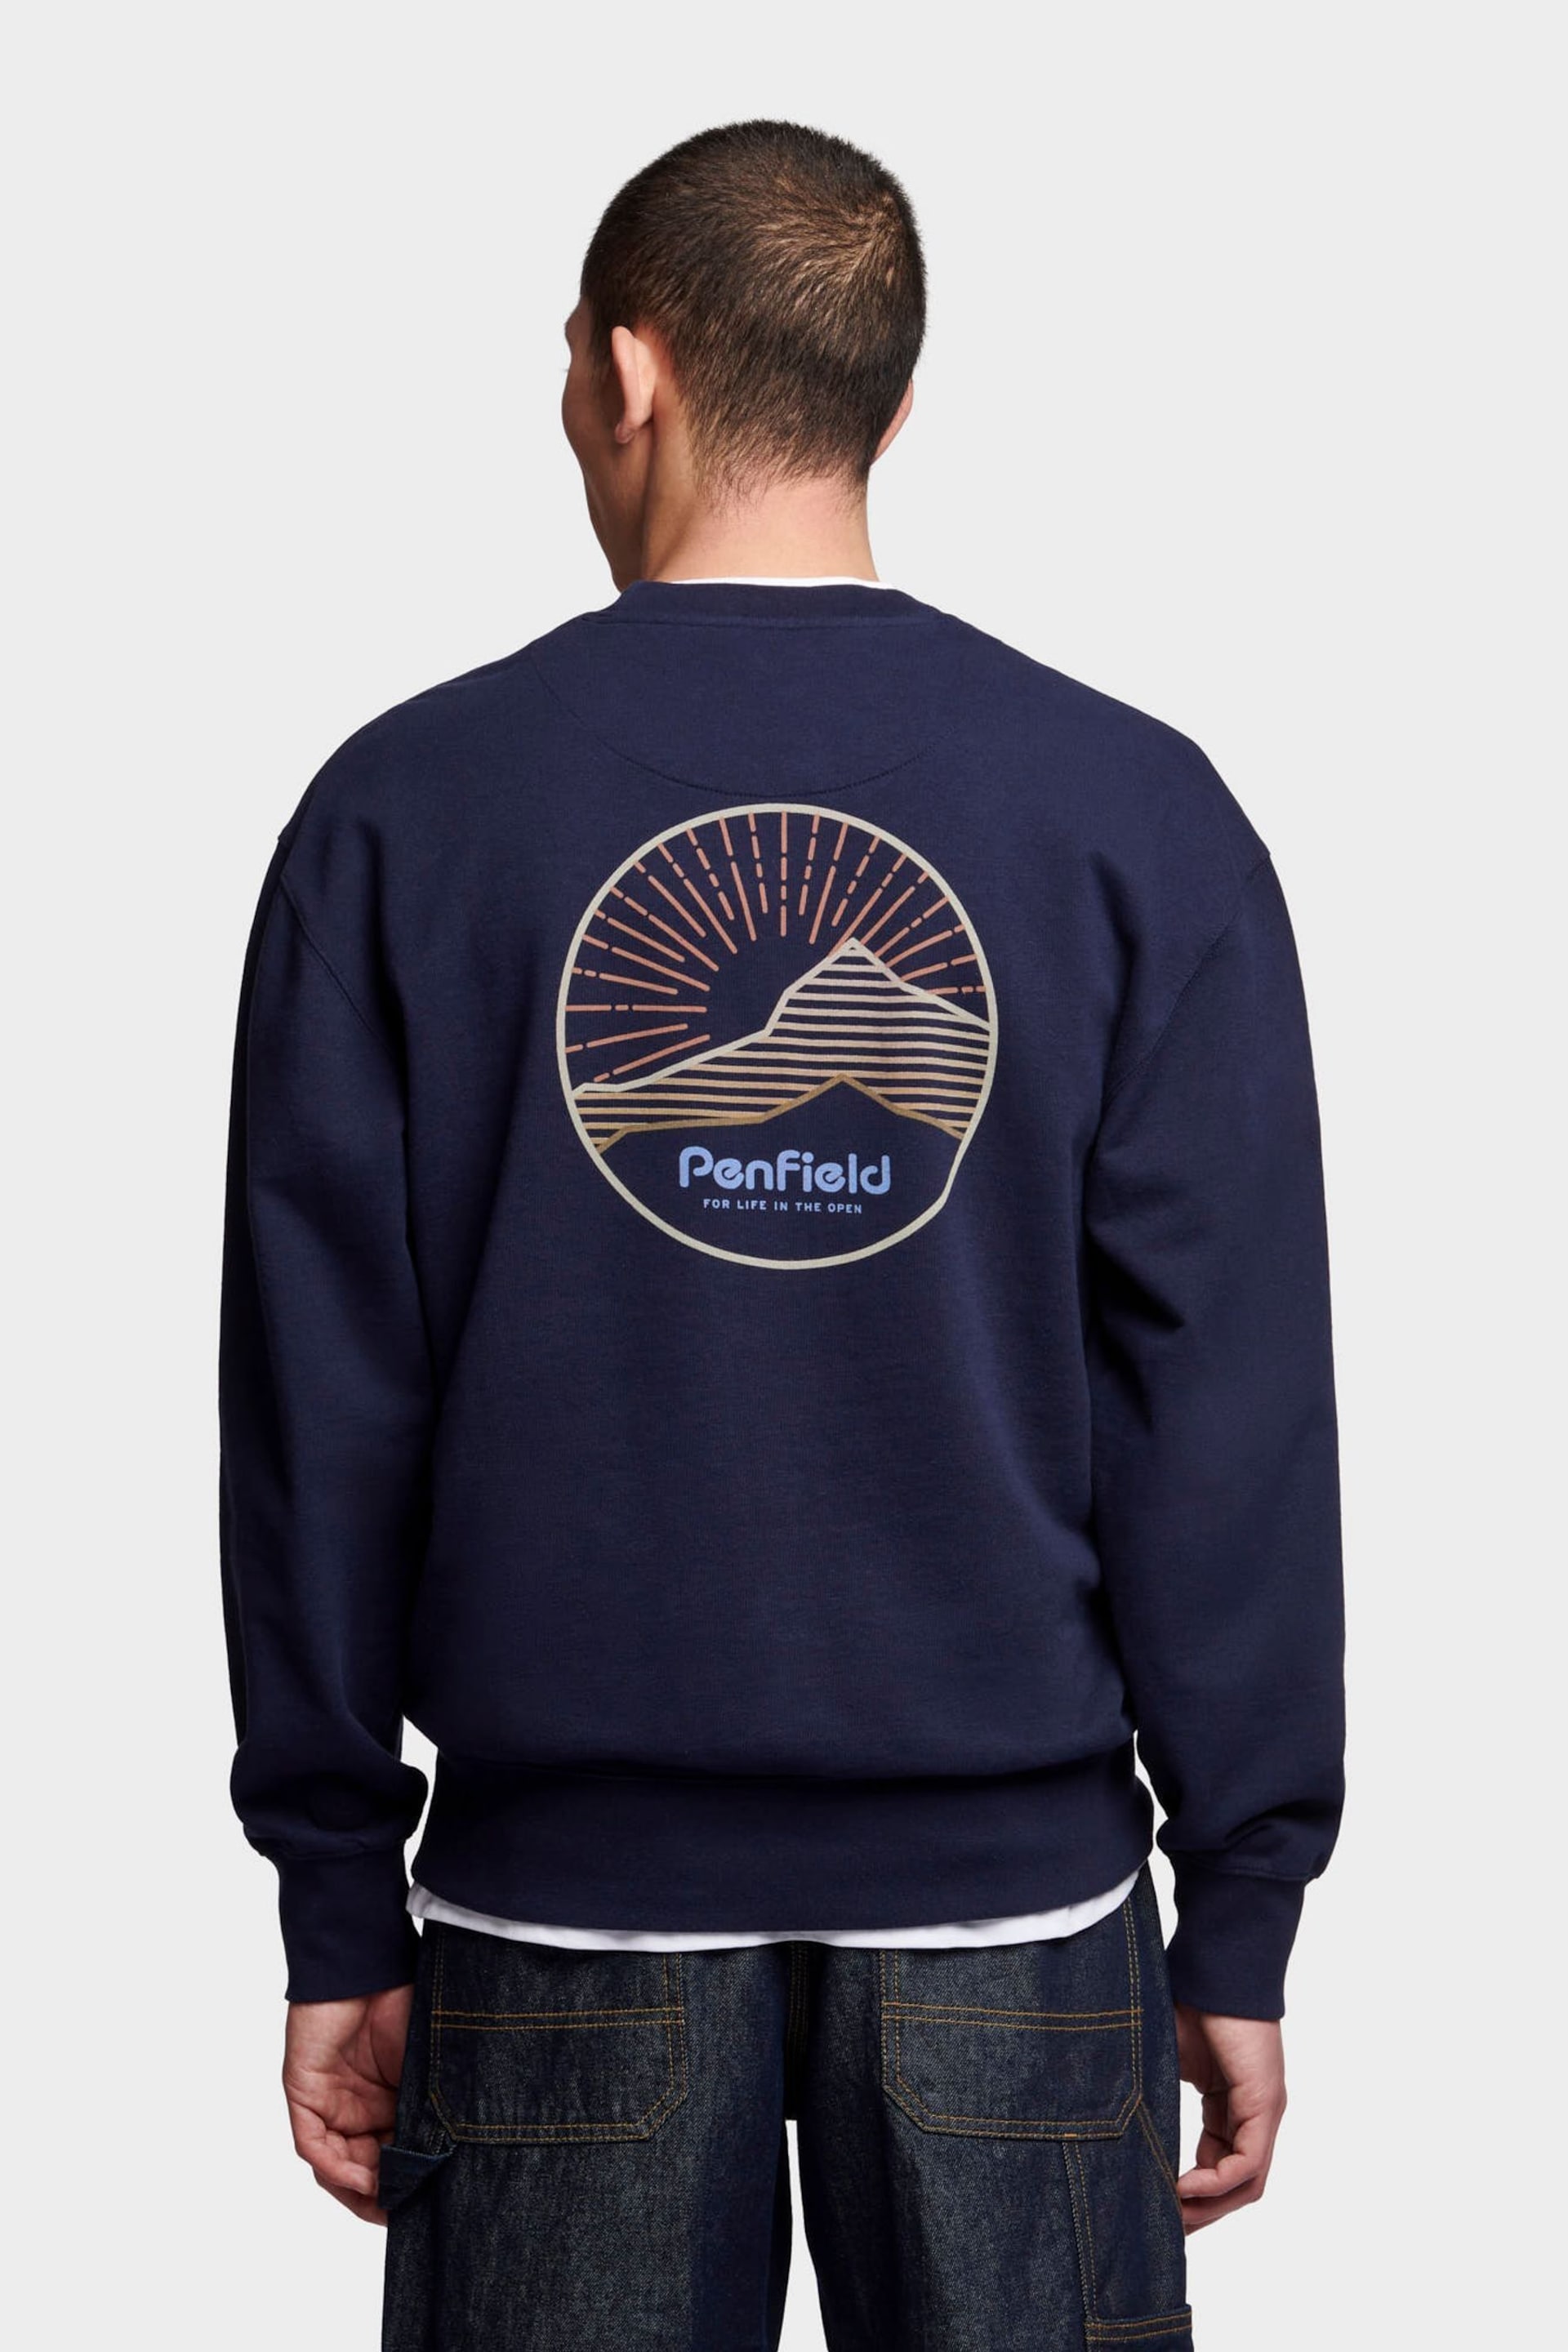 Penfield Mens Relaxed Fit Blue Circle Mountain Sweatshirt - Image 4 of 8